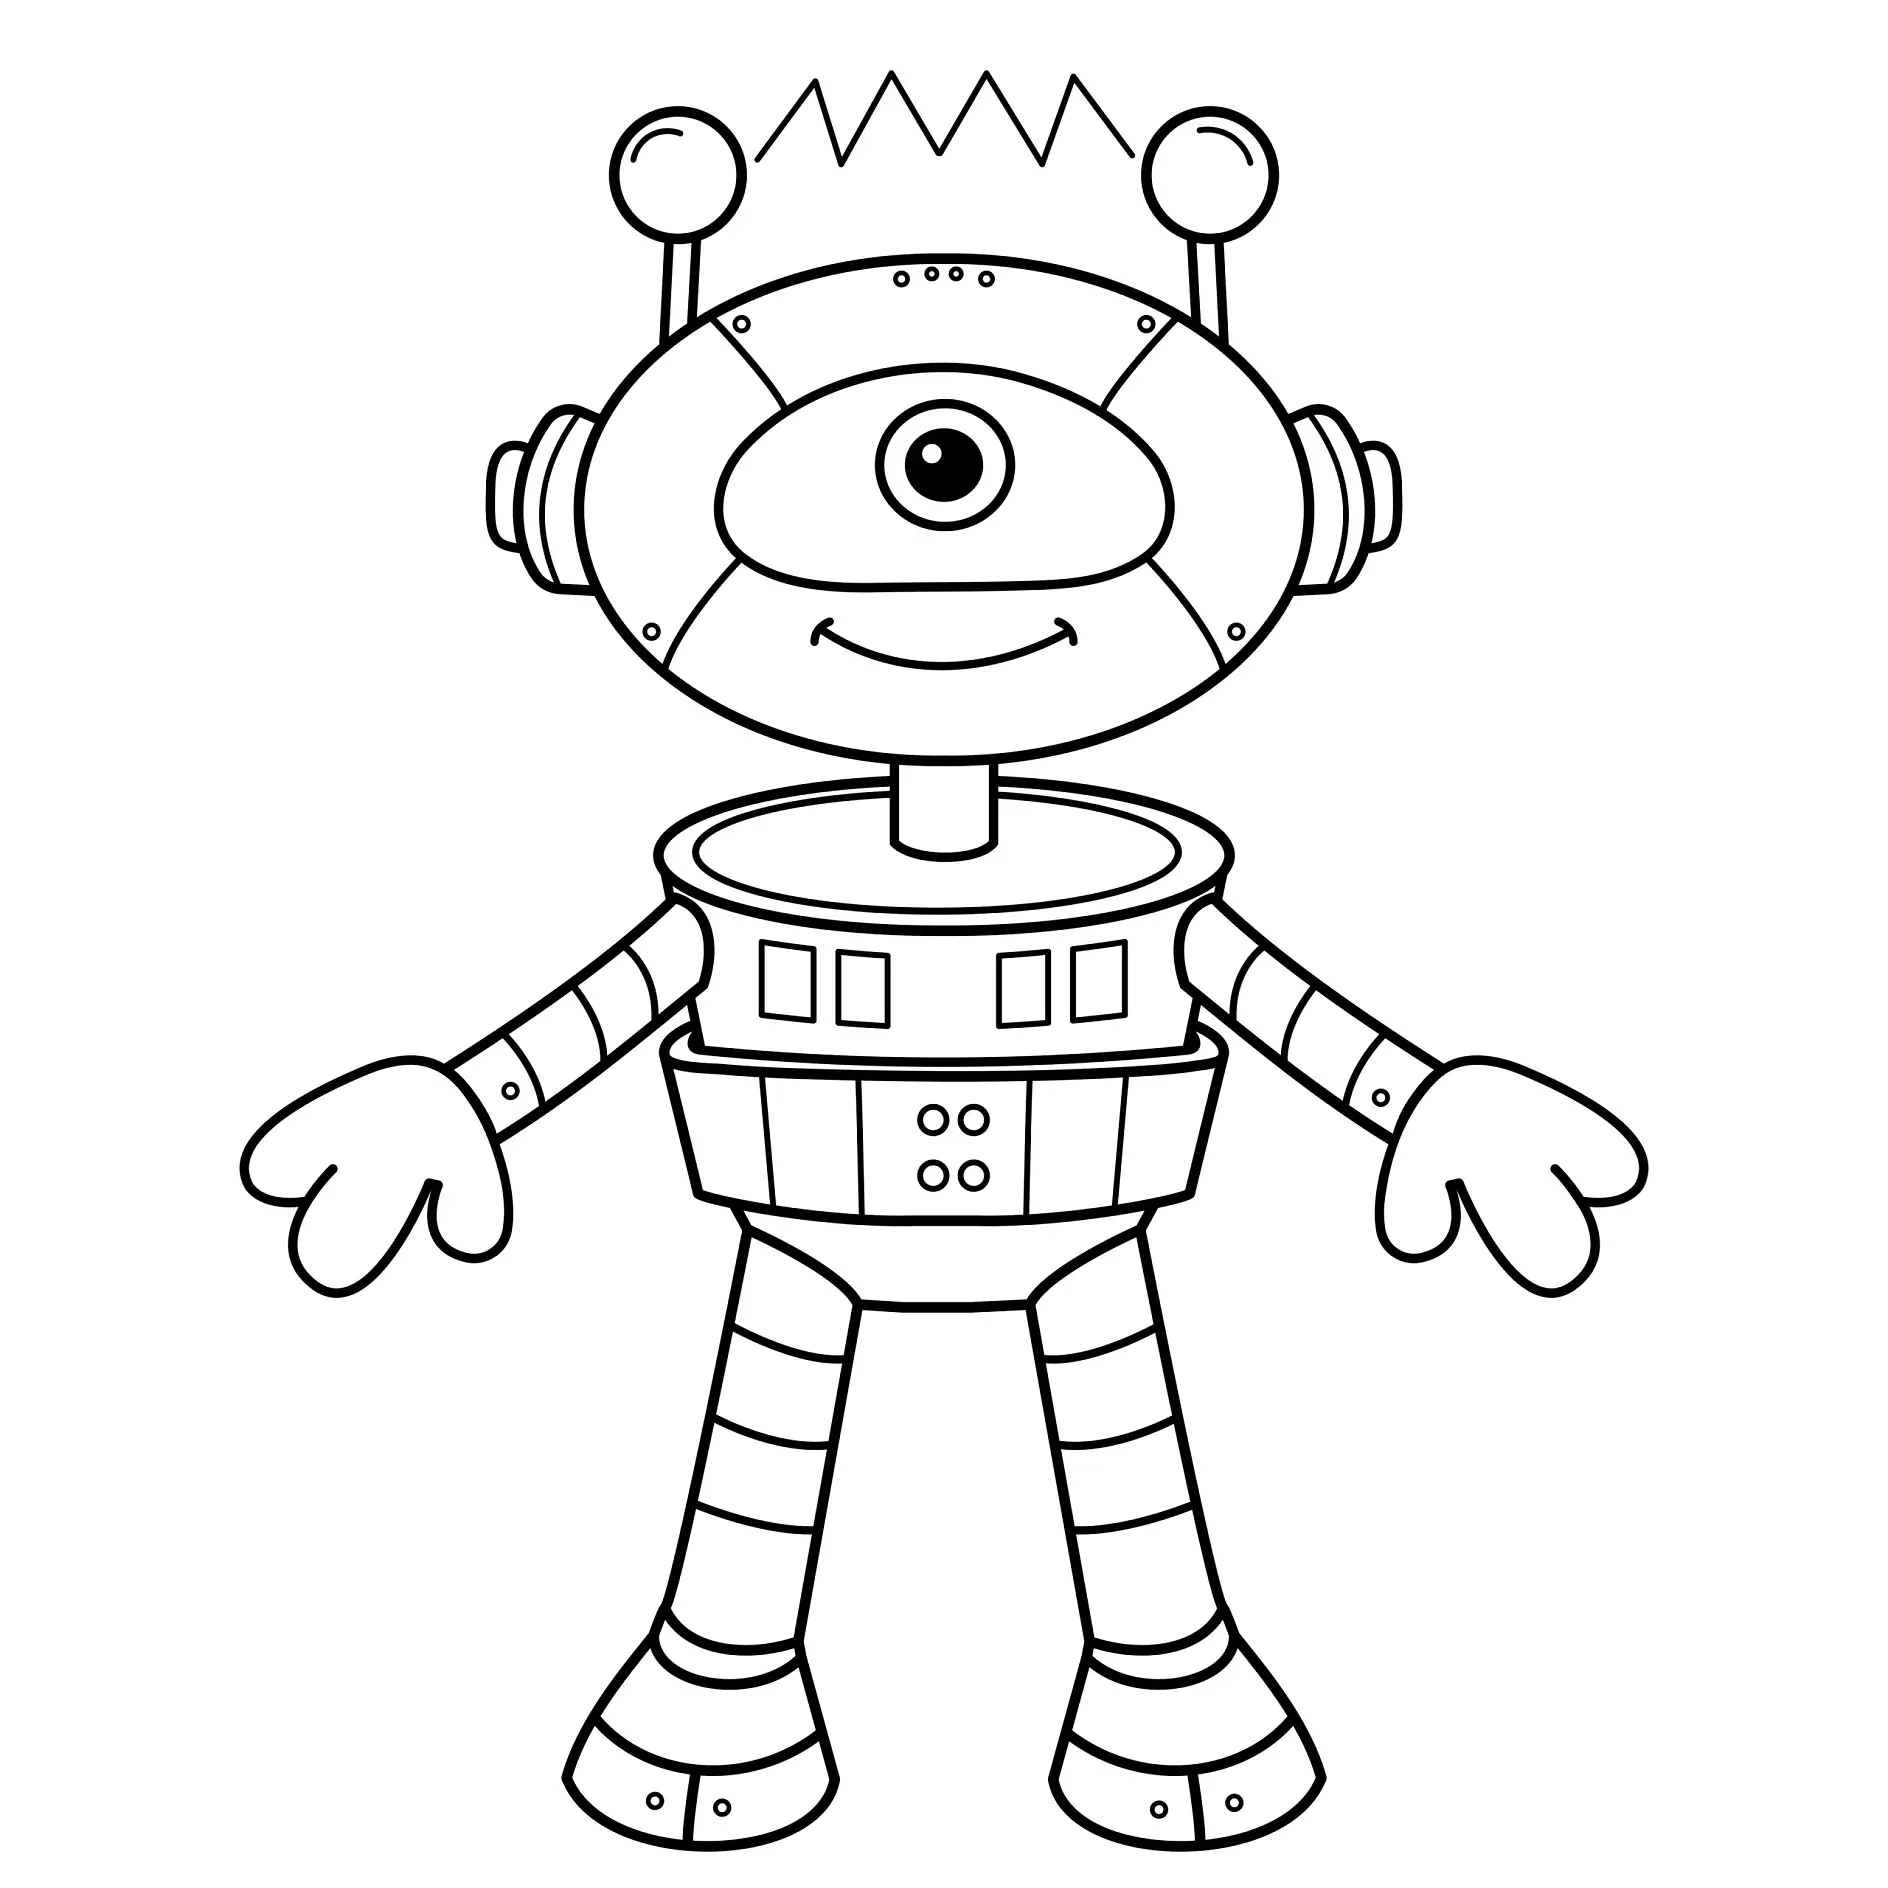 Coloring Page Outline Of cartoon robot for children. Vector. Coloring book for kids.